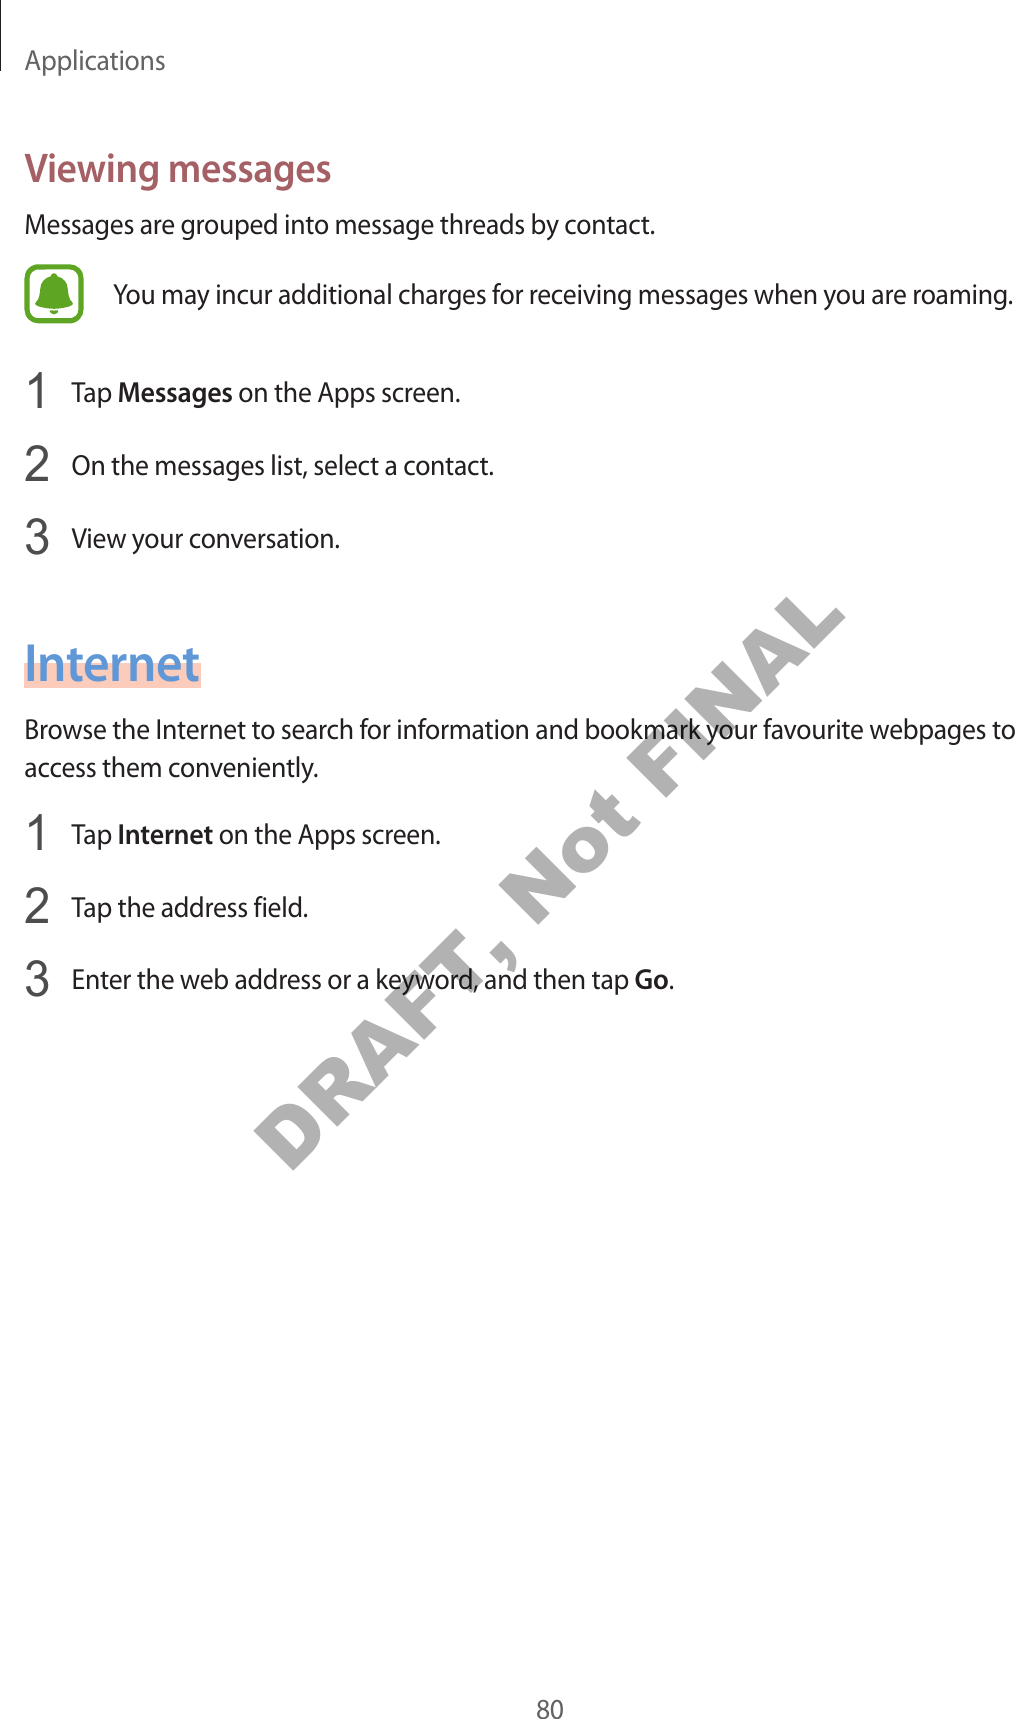 Applications80V ie wing messagesMessages are gr ouped int o message thr eads by c ontact.You may incur additional charges for r ec eiving messages when y ou ar e r oaming .1  Tap Messages on the Apps screen.2  On the messages list, select a contact.3  View y our c on v ersa tion.InternetBrow se the Internet to sear ch for information and bookmark your fa v ourite w ebpages t o access them c on v eniently.1  Tap Internet on the Apps screen.2  Tap the address field.3  Enter the w eb addr ess or a keywor d , and then tap Go.DRAFT, Not FINAL